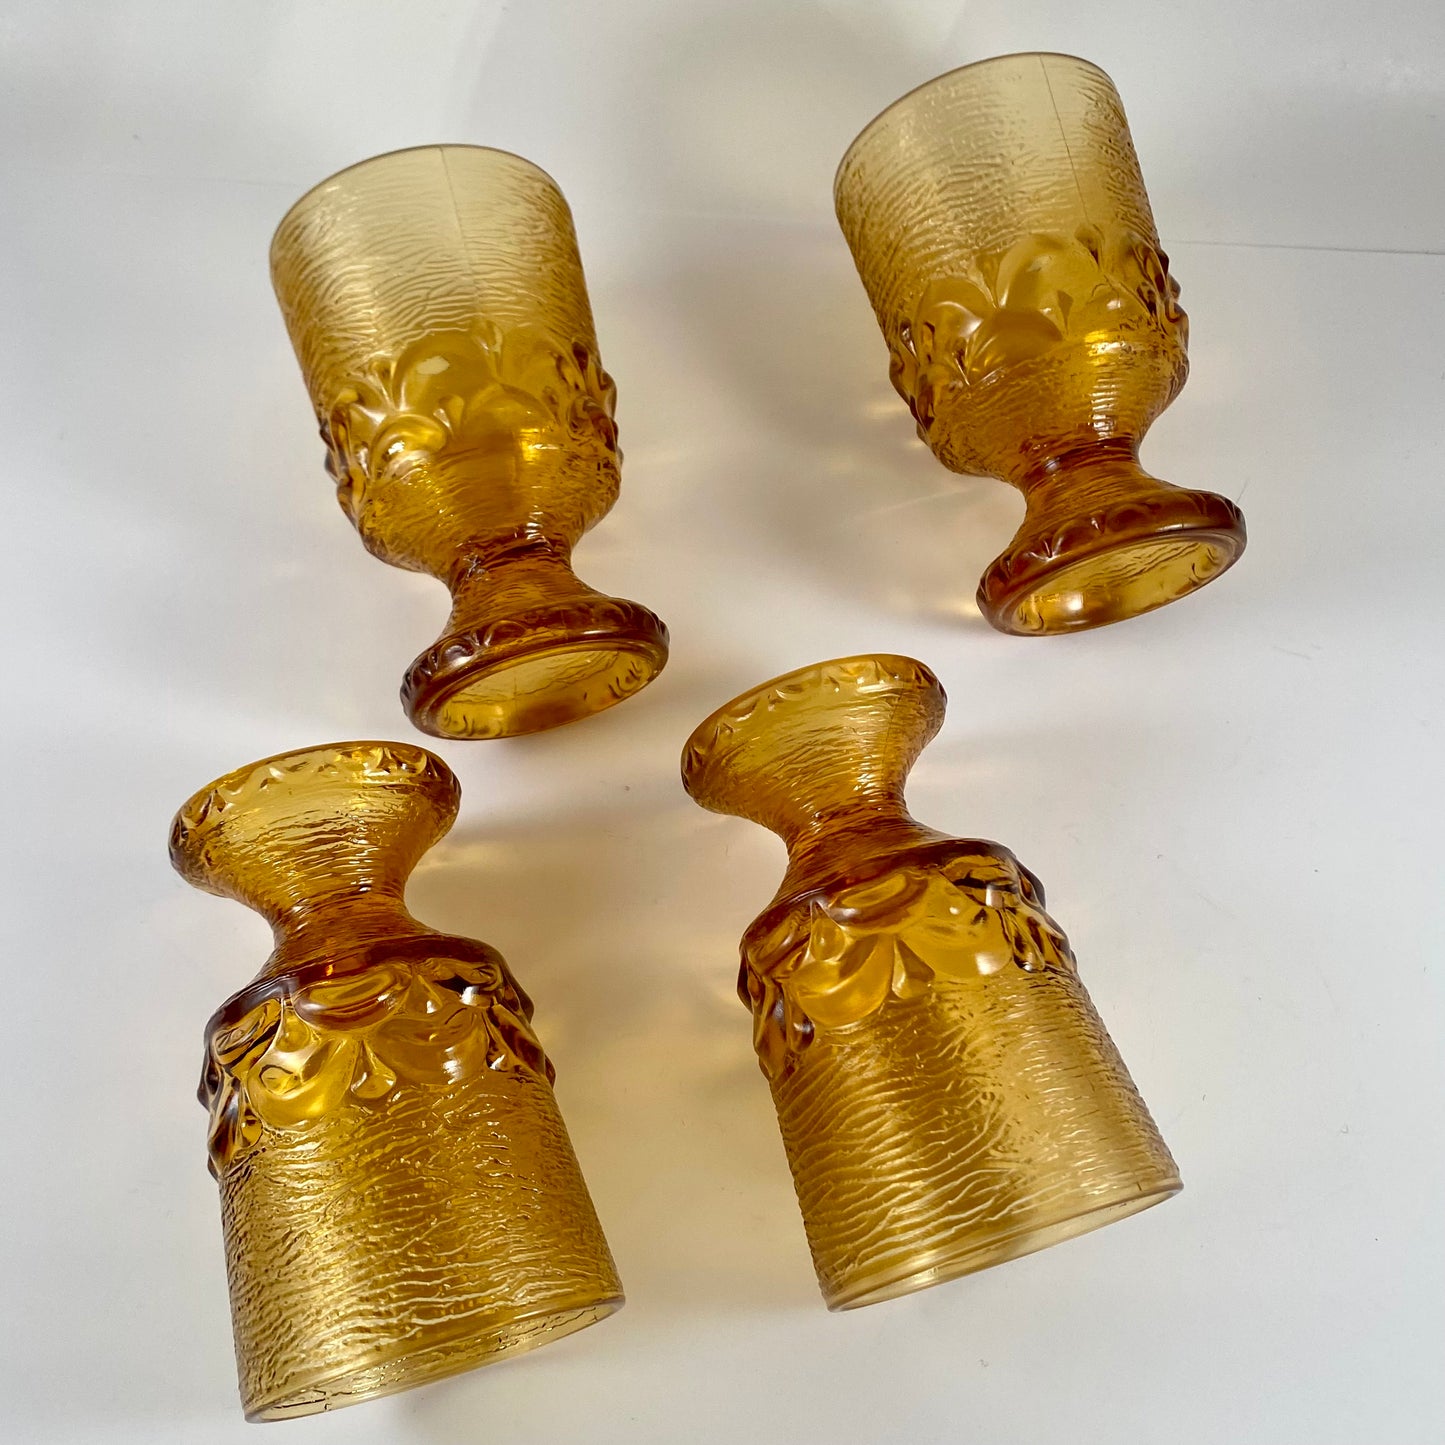 1970s Honey Amber Wine/Water Glass Set (4 Pieces)